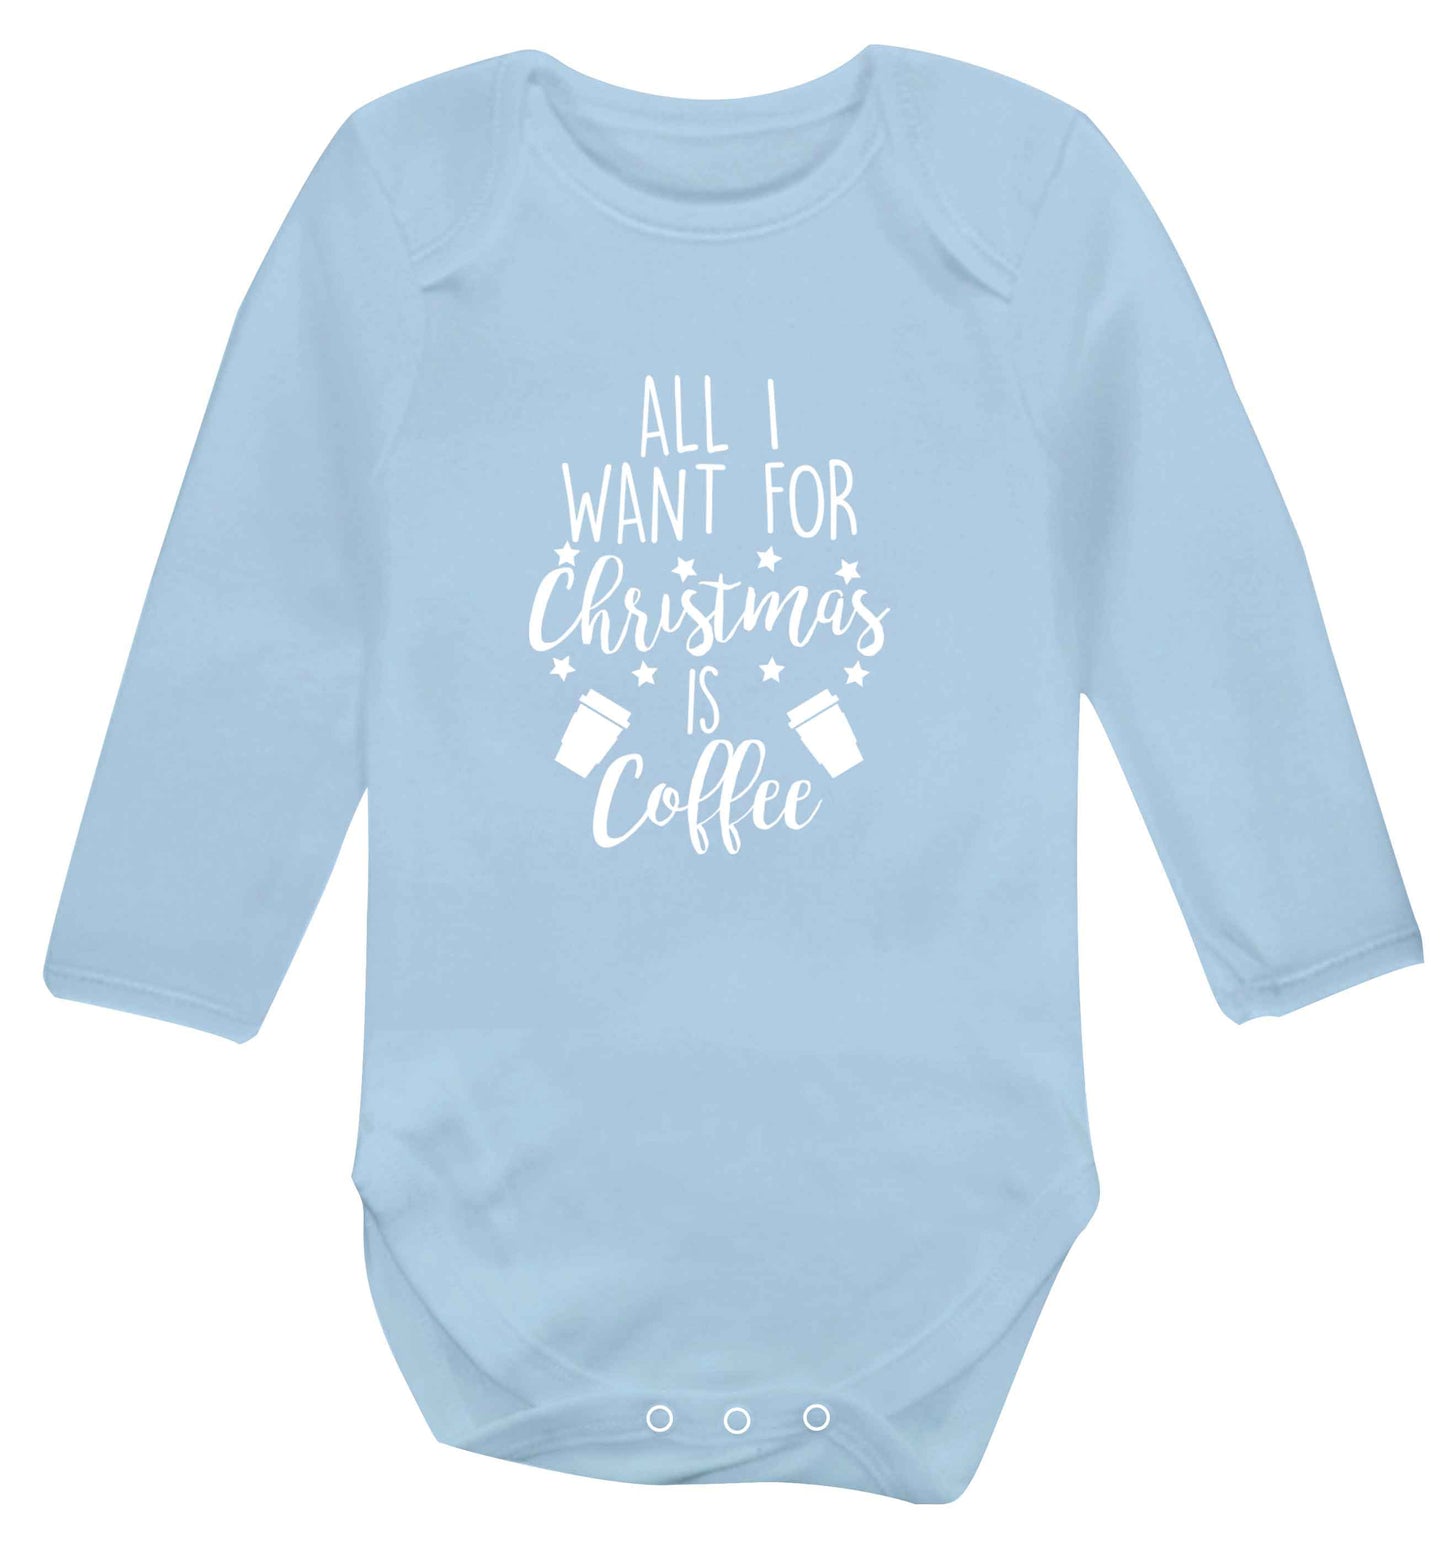 All I want for Christmas is coffee Baby Vest long sleeved pale blue 6-12 months